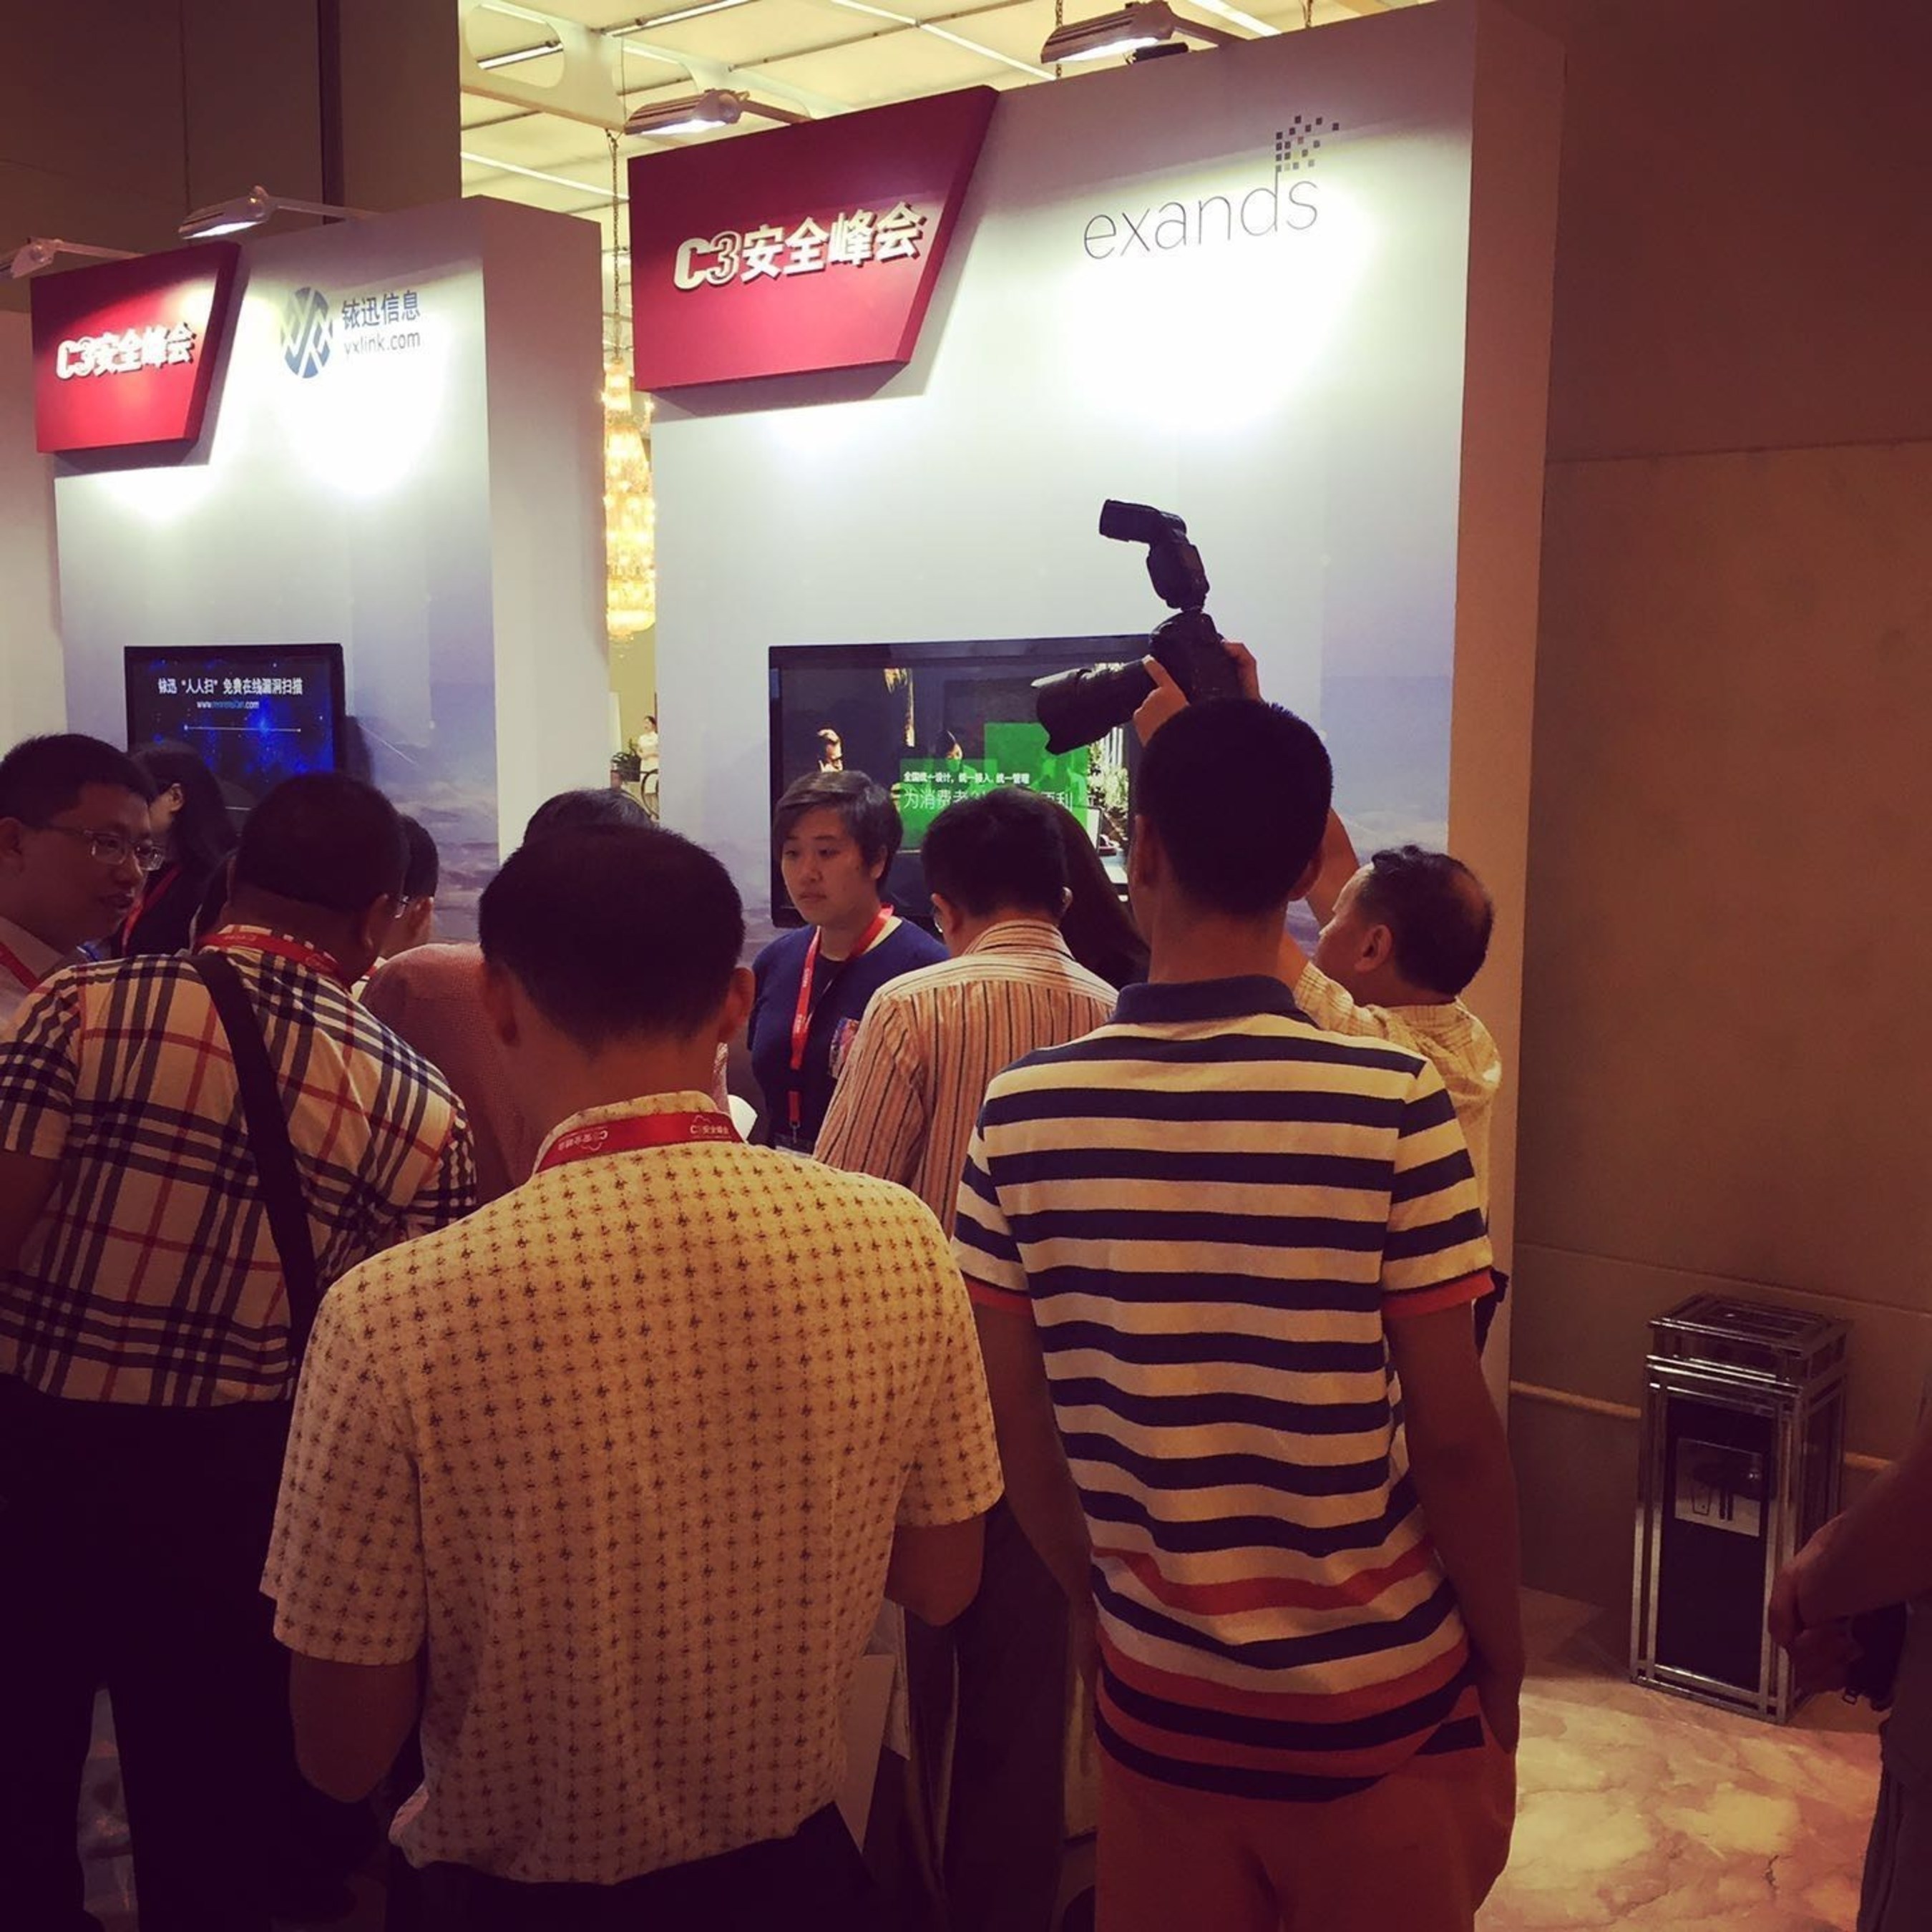 Network security experts show great interest in exands commercial Wi-Fi